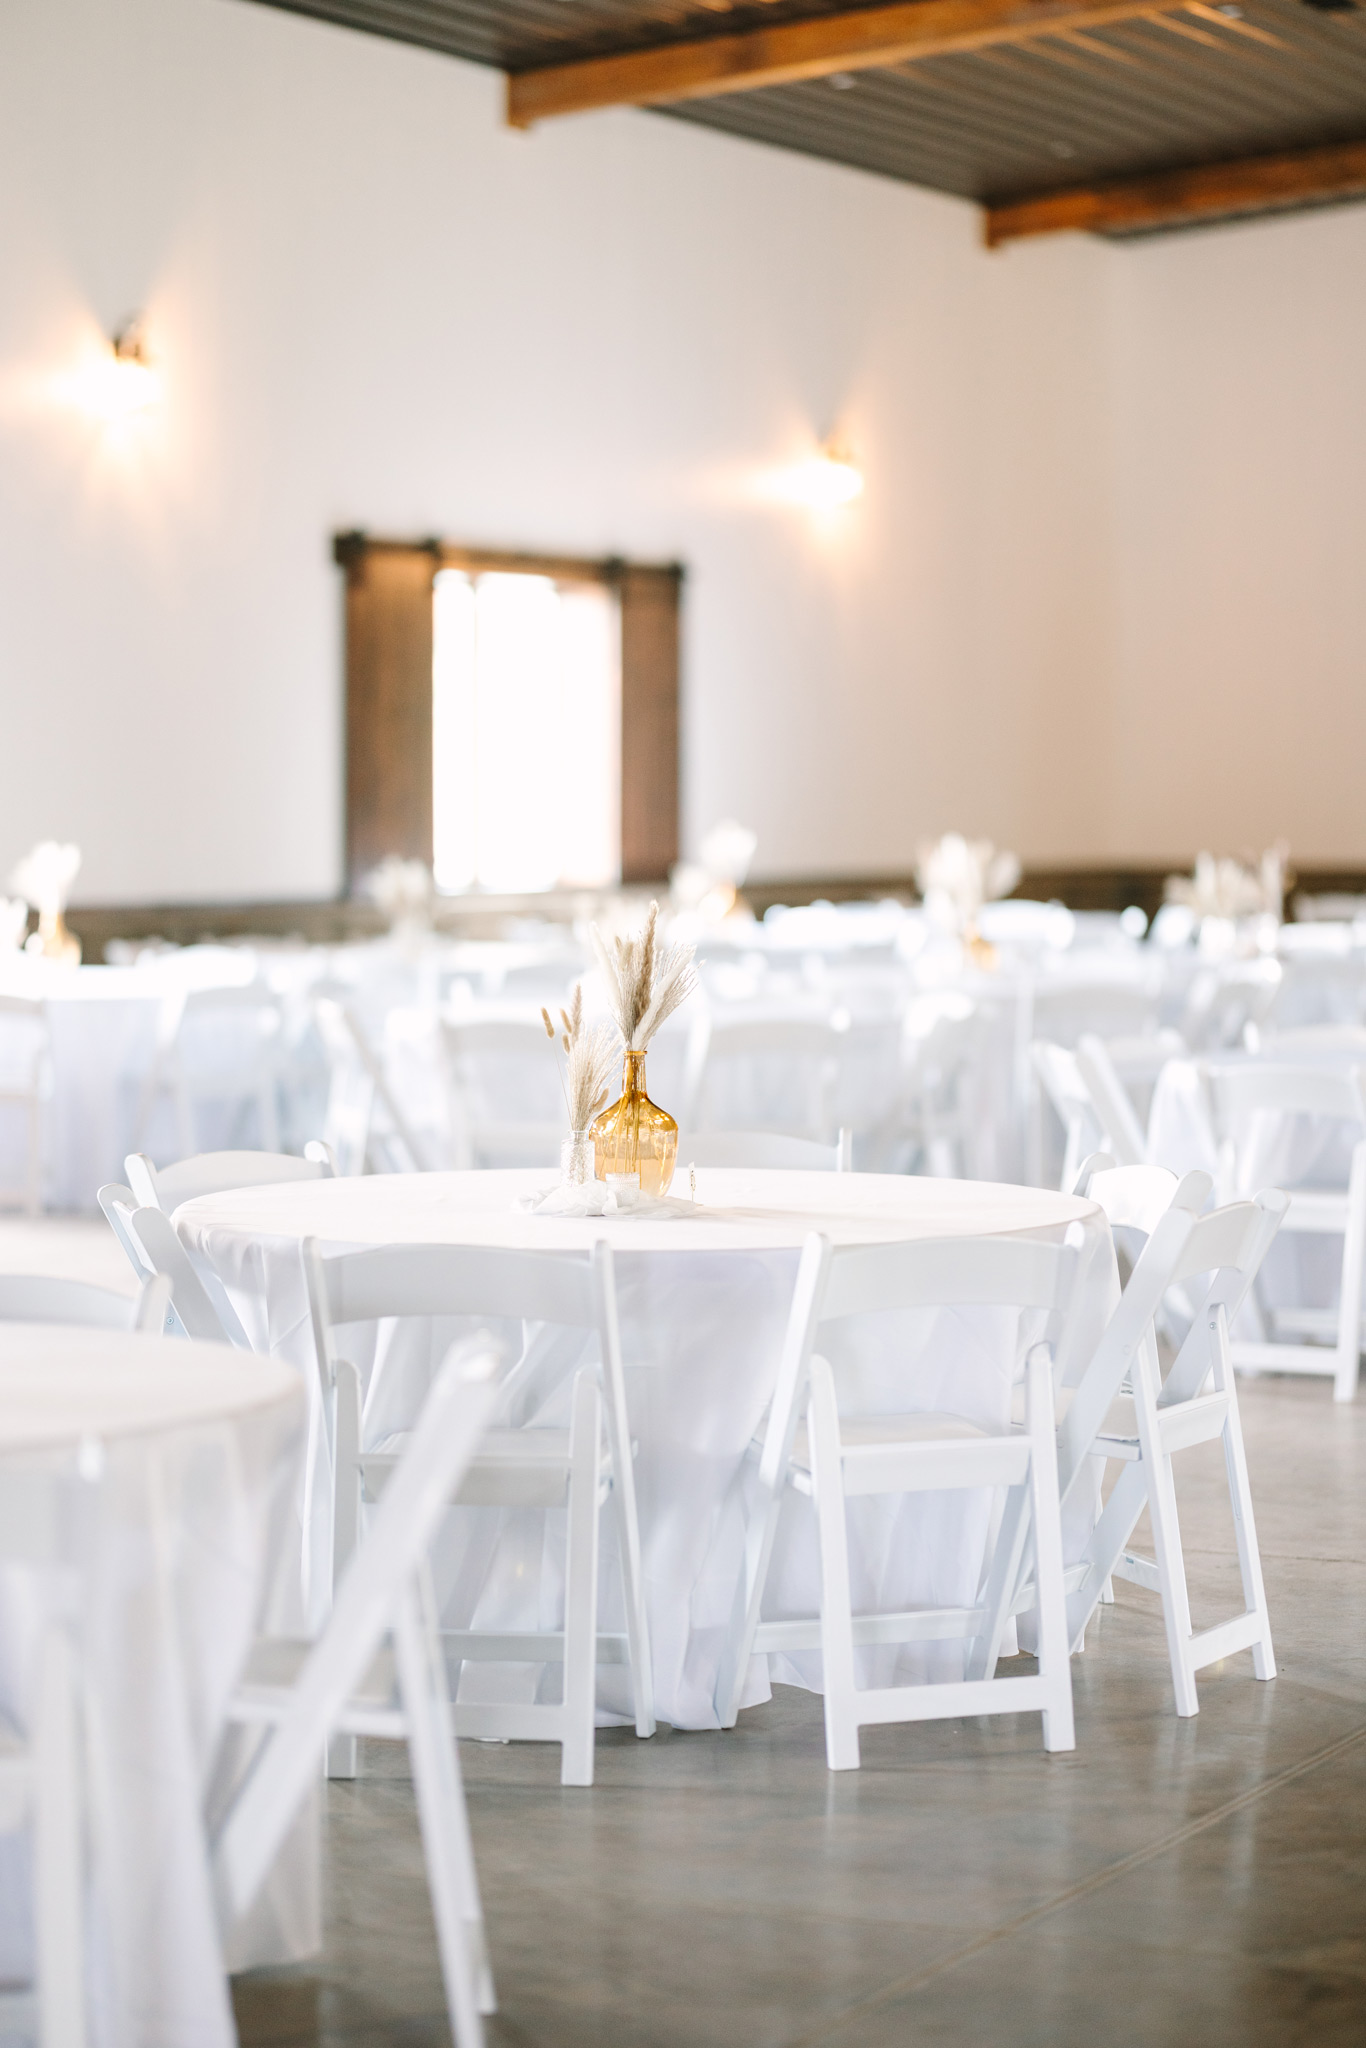 Tables at The VeNue Event Space set up with white linens and ready for a wedding